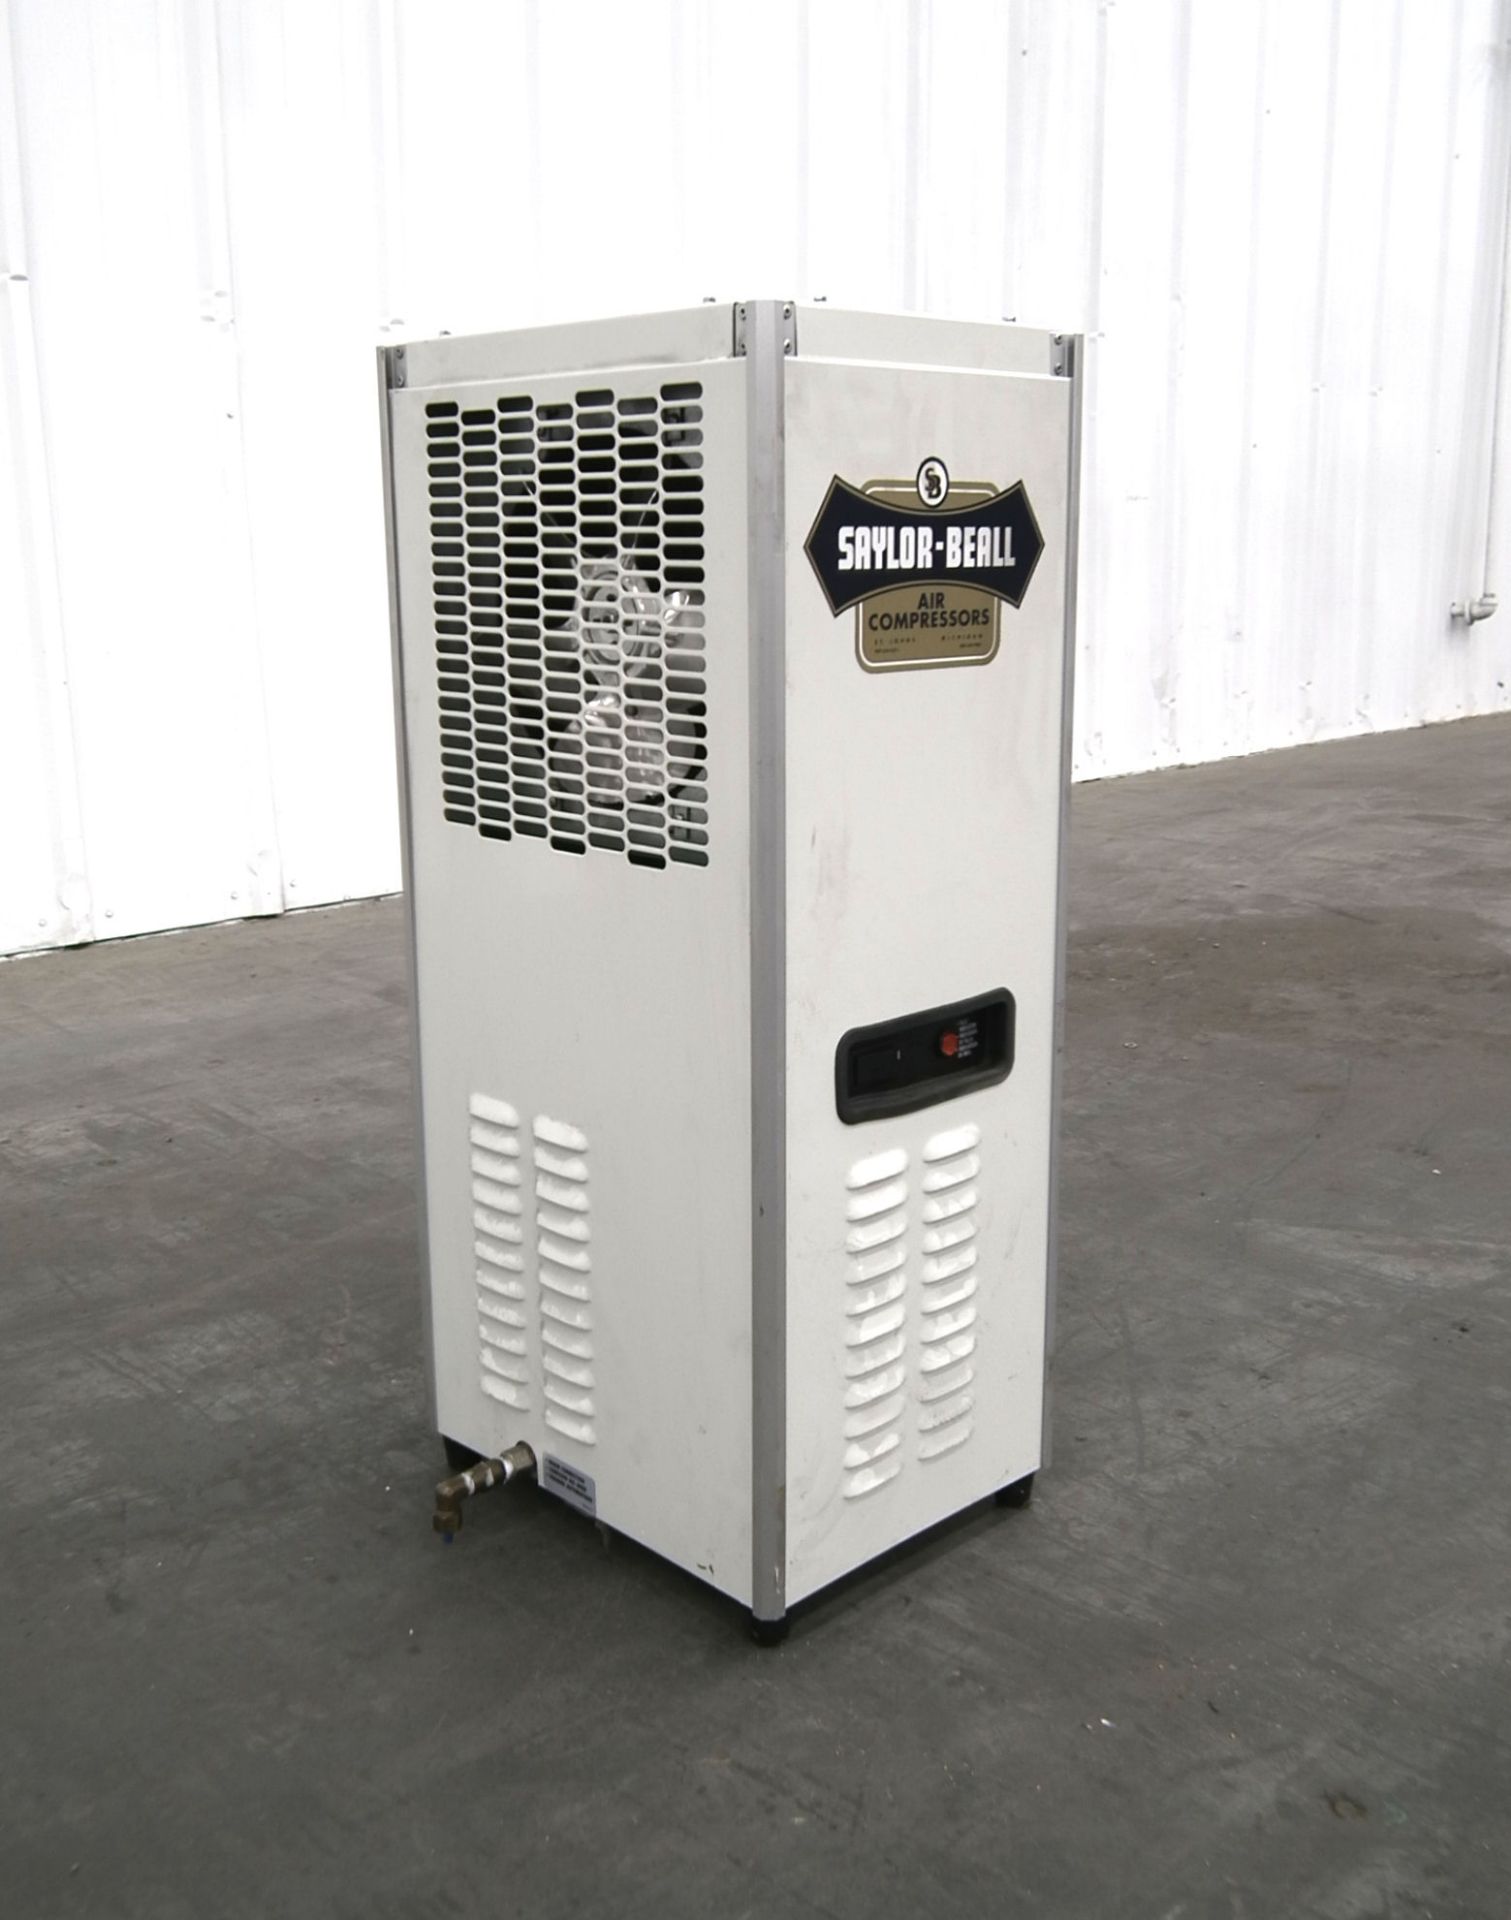 Saylor Beall SBRH-20-1 Compressed Air Dryer (Rigging Fee - $70) - Image 3 of 8